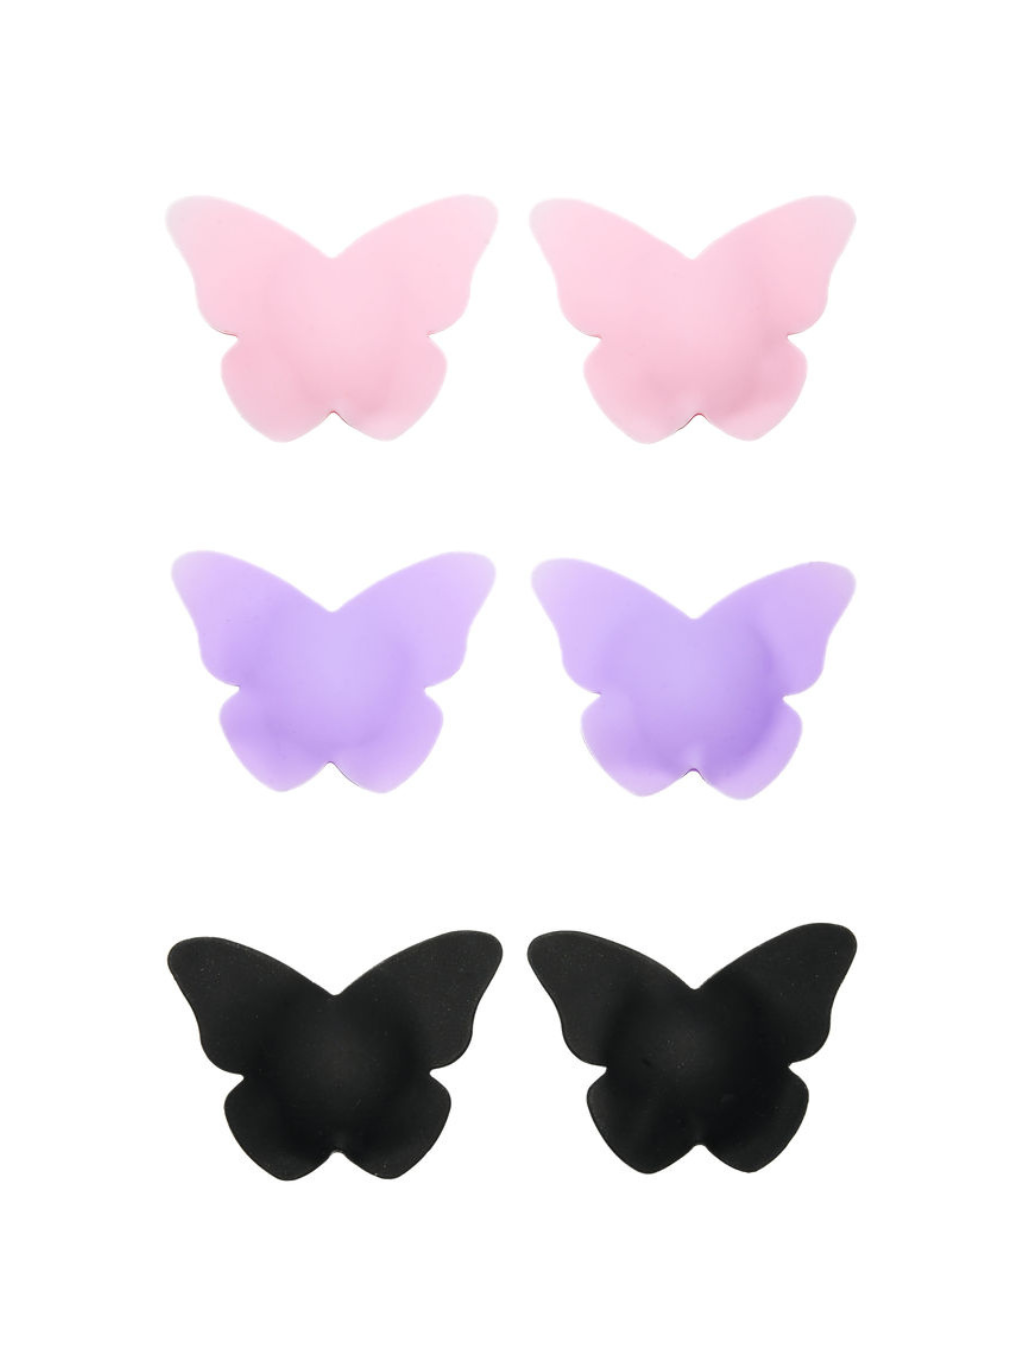 The Butterfly Bundle